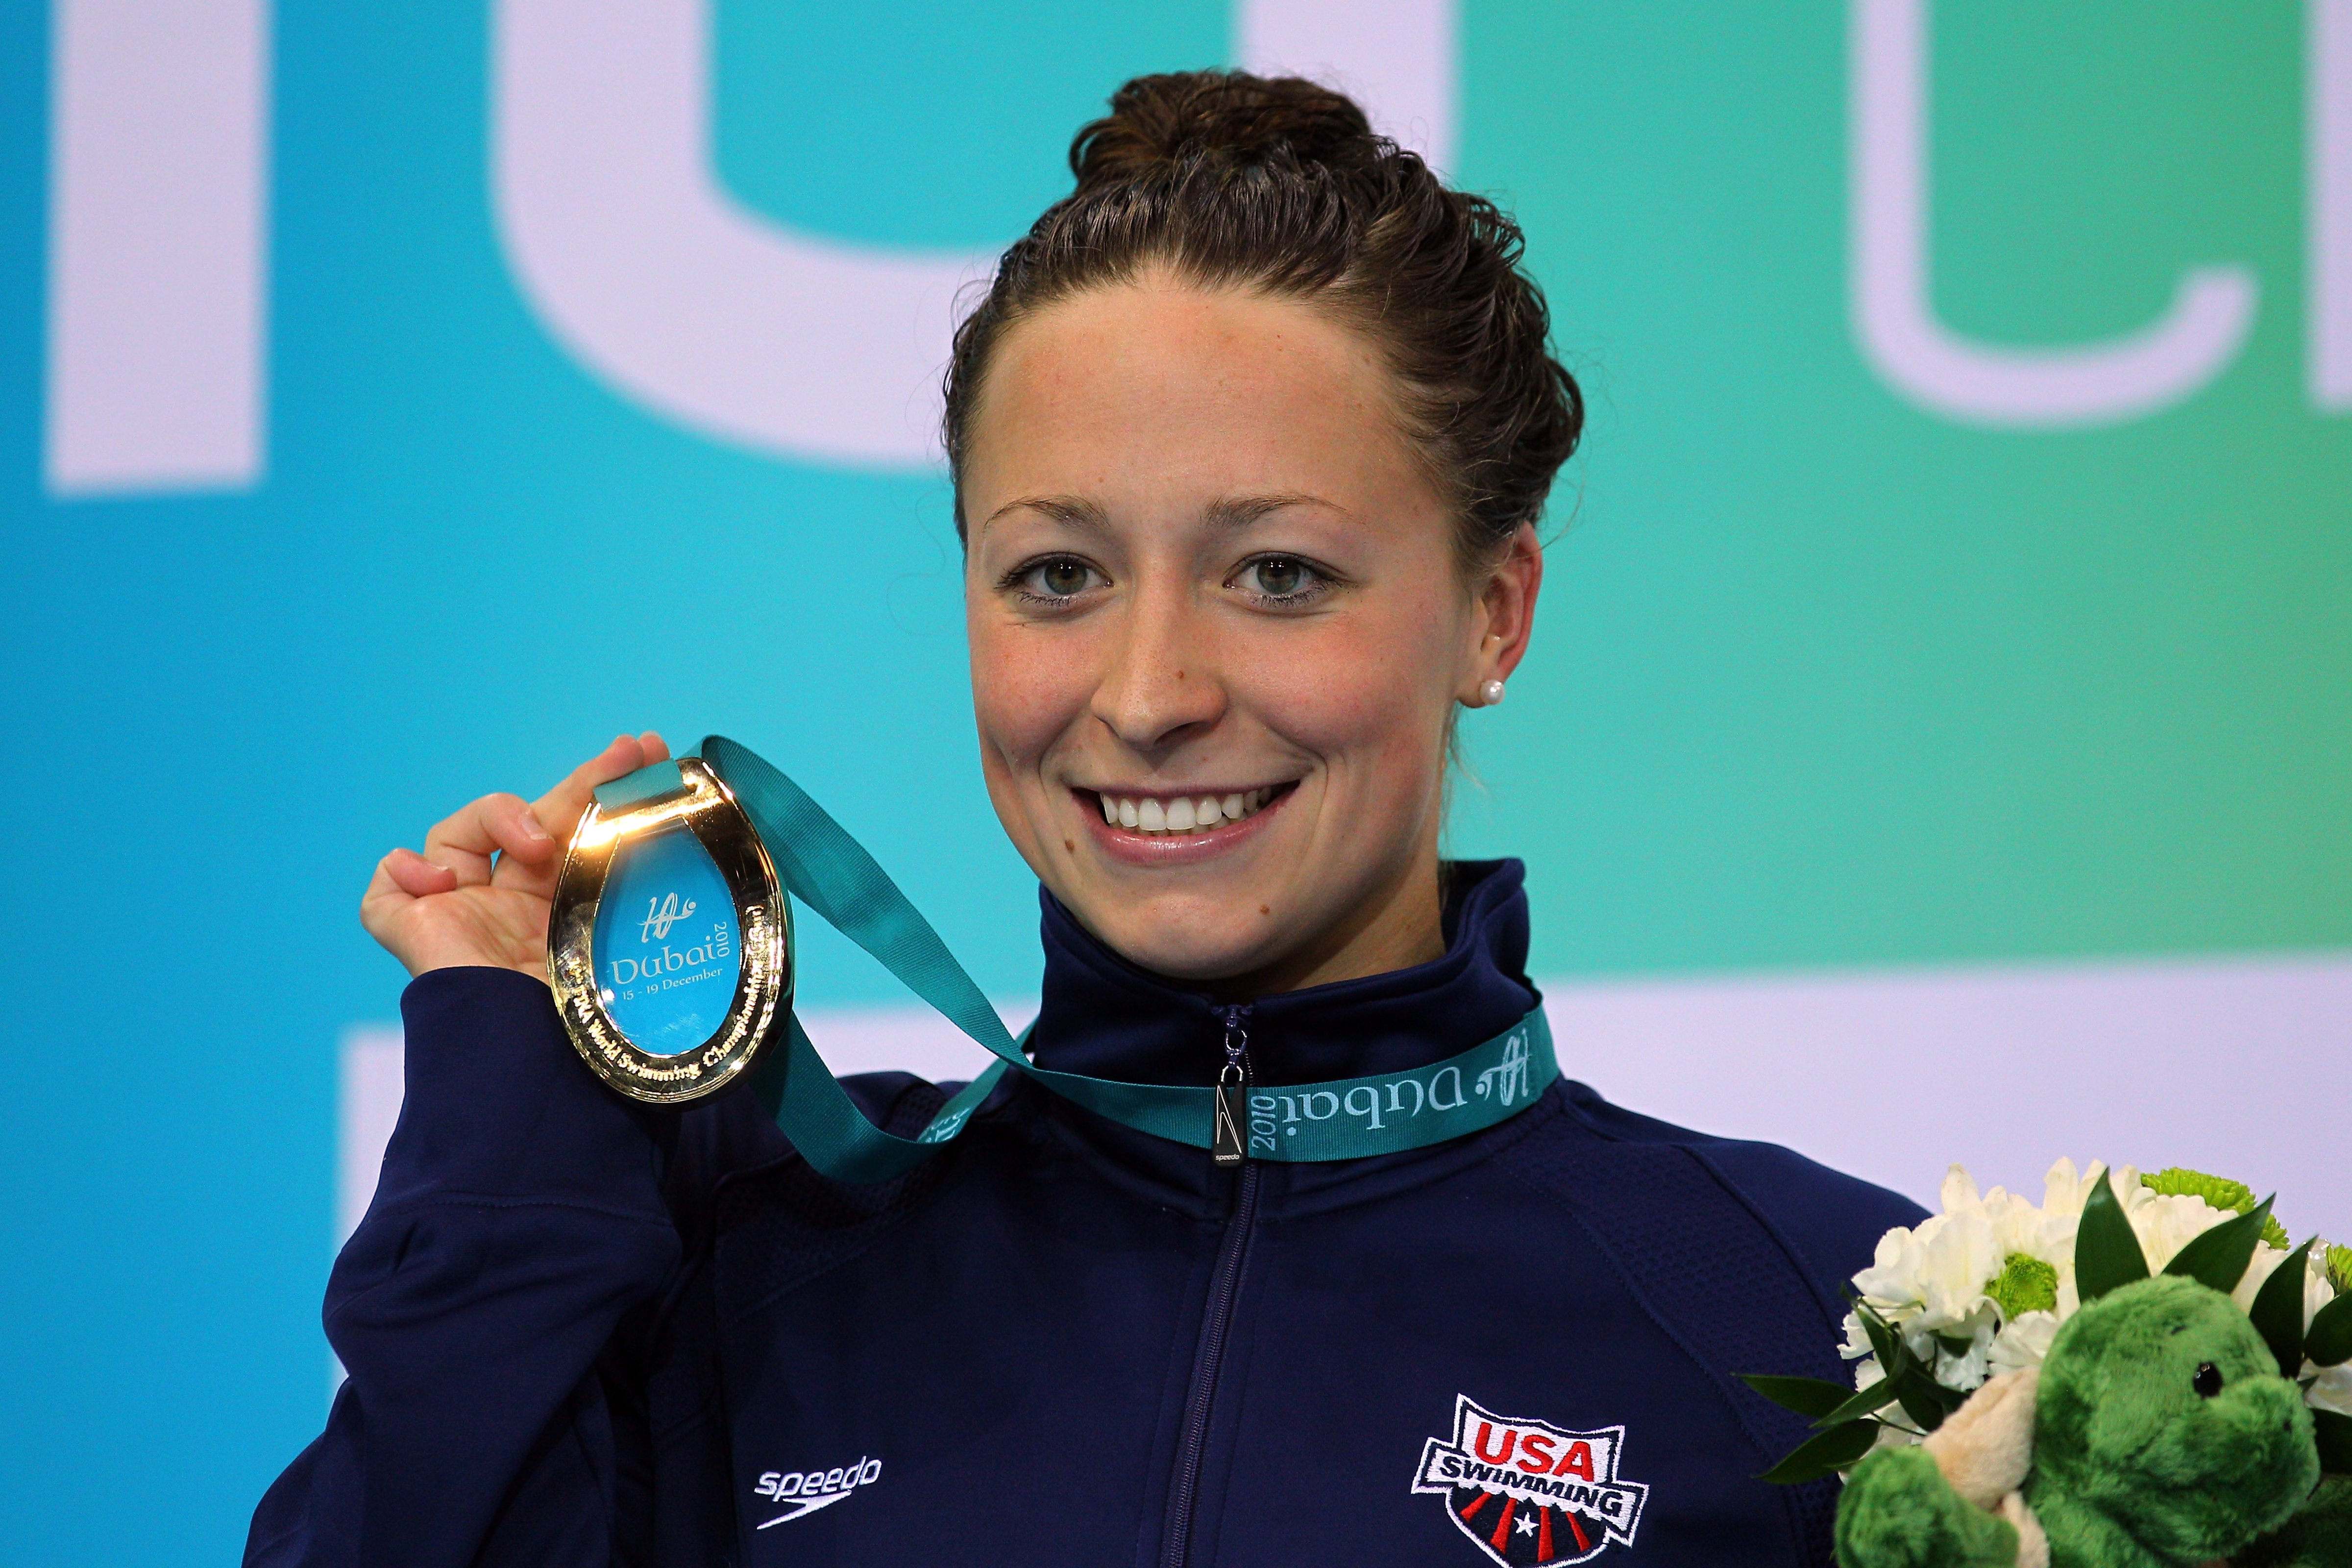 Ariana Kukors poses with her Gold medal after winning the Women's 100m Individual Medley final at the FINA World Swimming Championships. (Clive Rose&mdash;Getty Images)